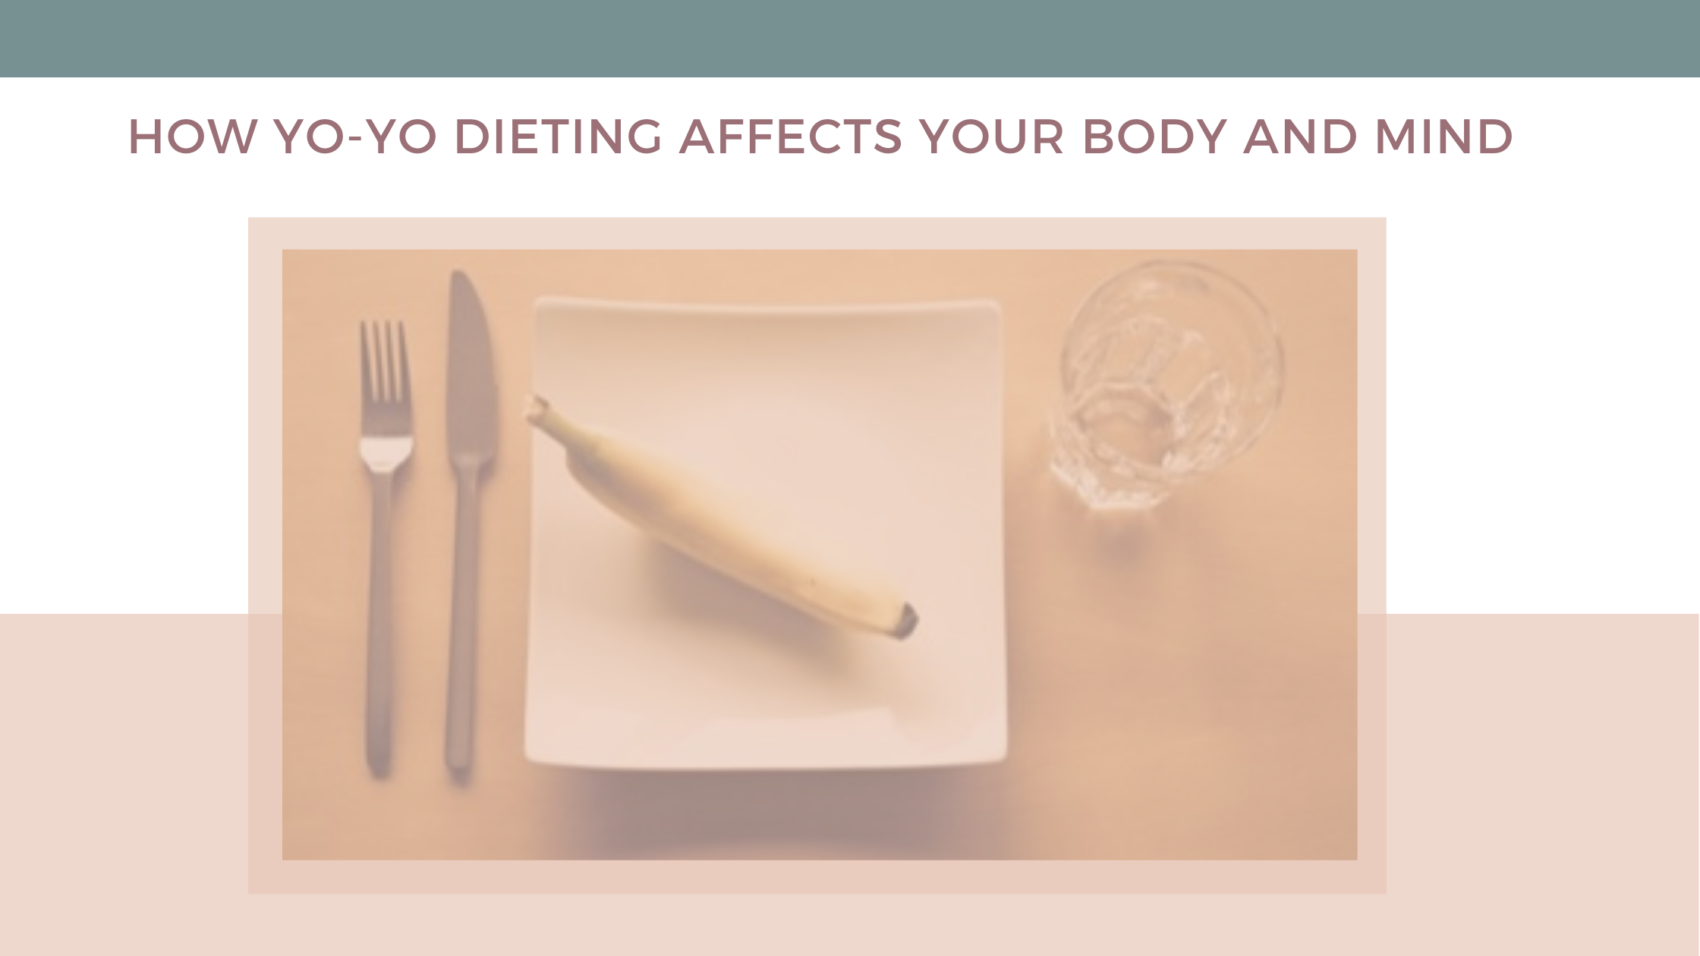 How yo-yo dieting affects your body and mind